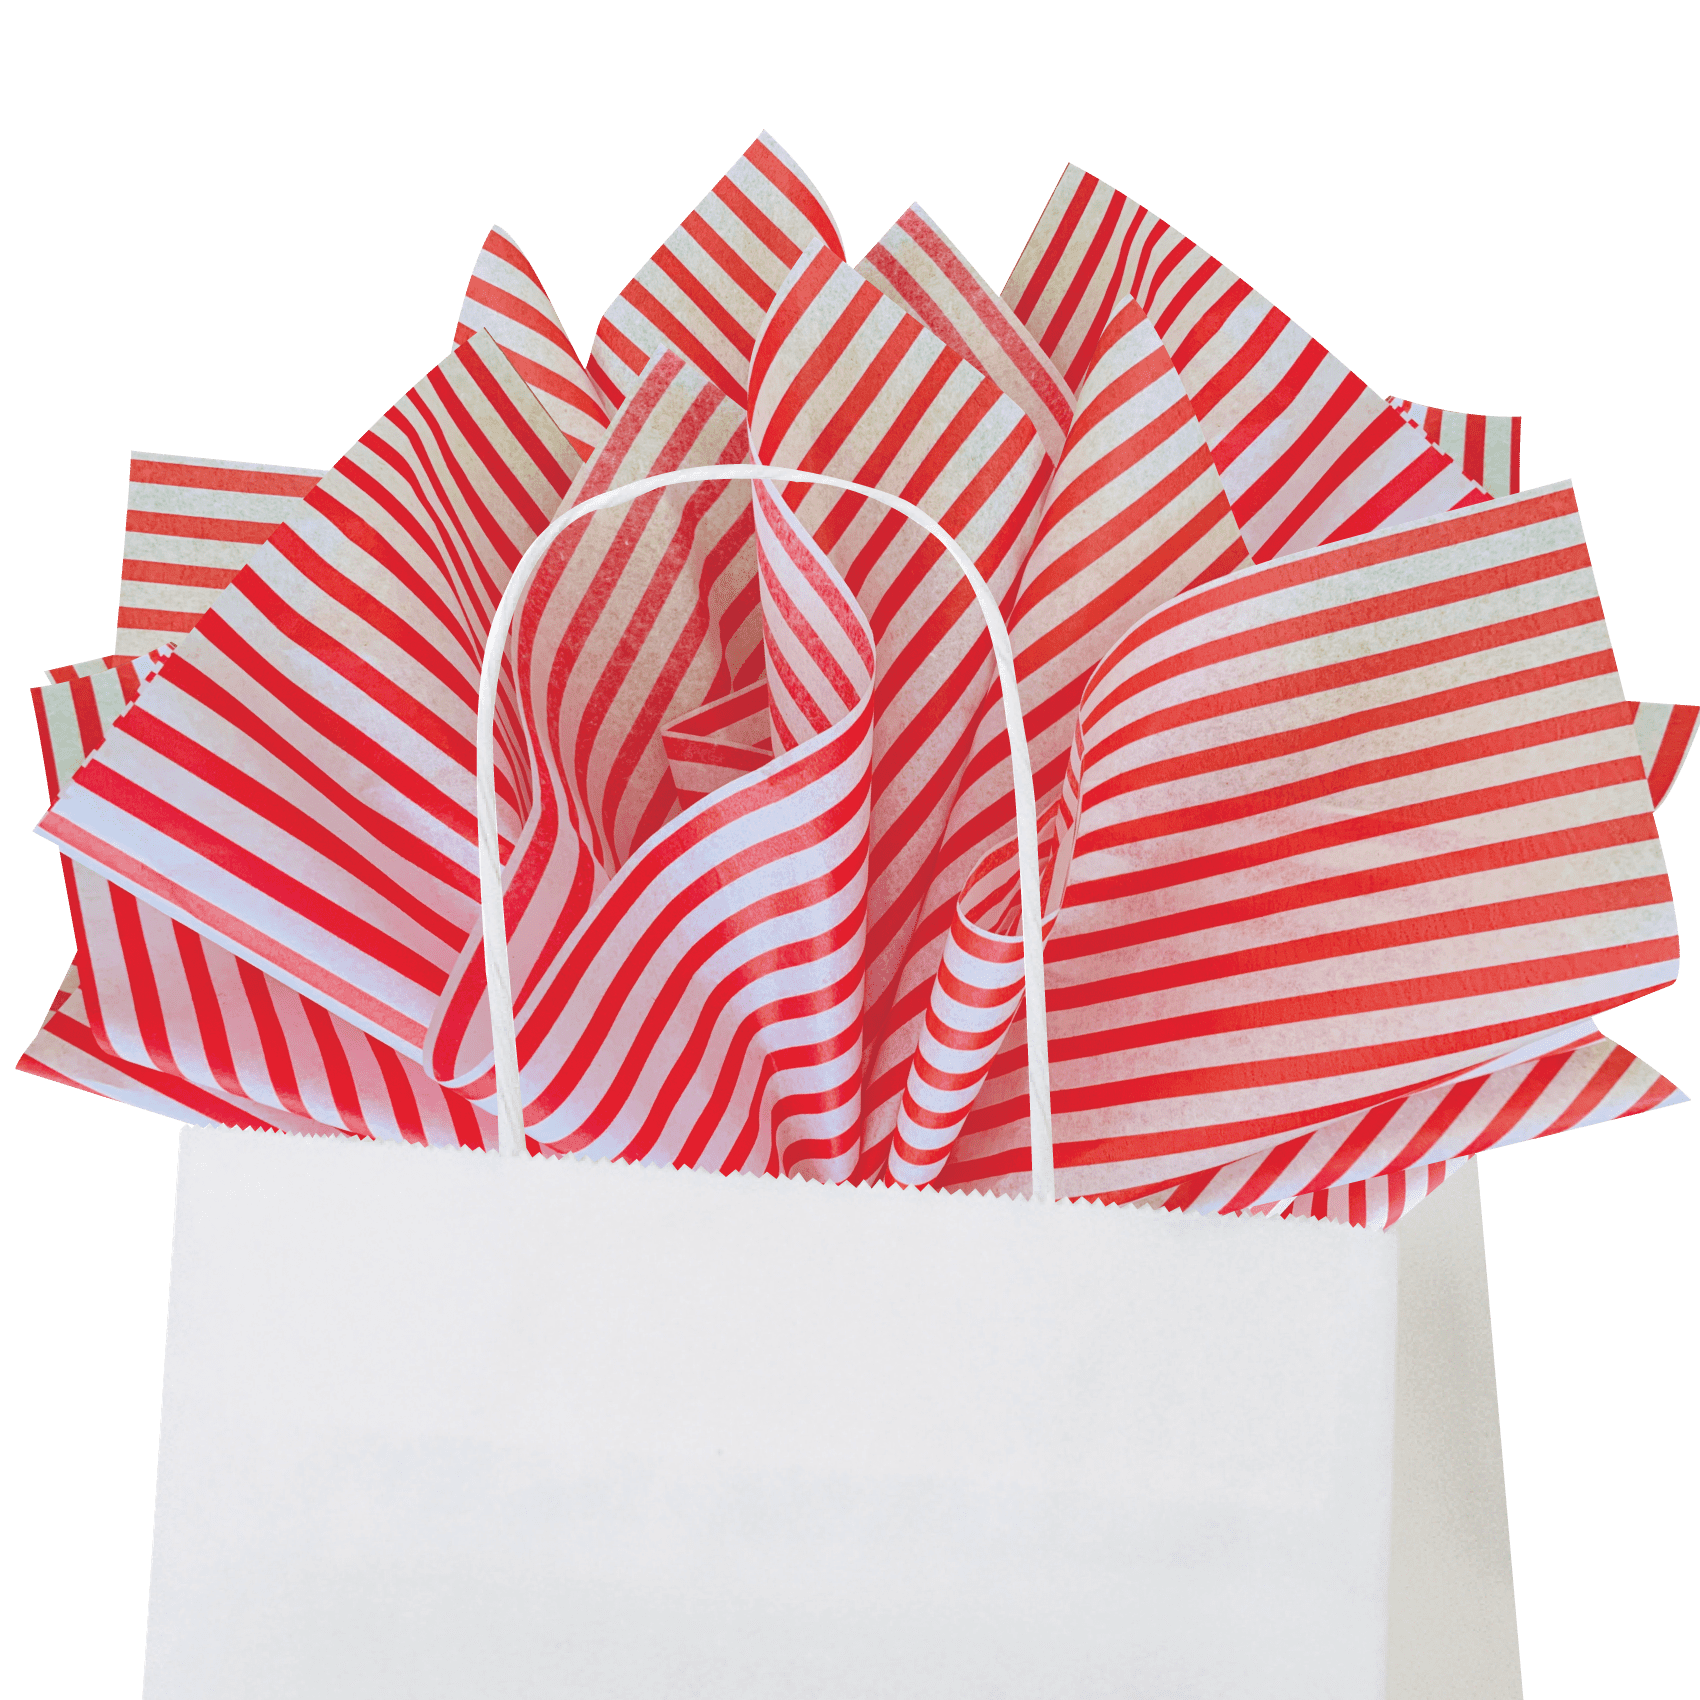 Flexicore Packaging Navy Blue Pin Stripe Print Gift Wrap Tissue Paper Size:  15 Inch X 20 Inch | Count: 10 Sheets | Color: Navy Pin Stripe